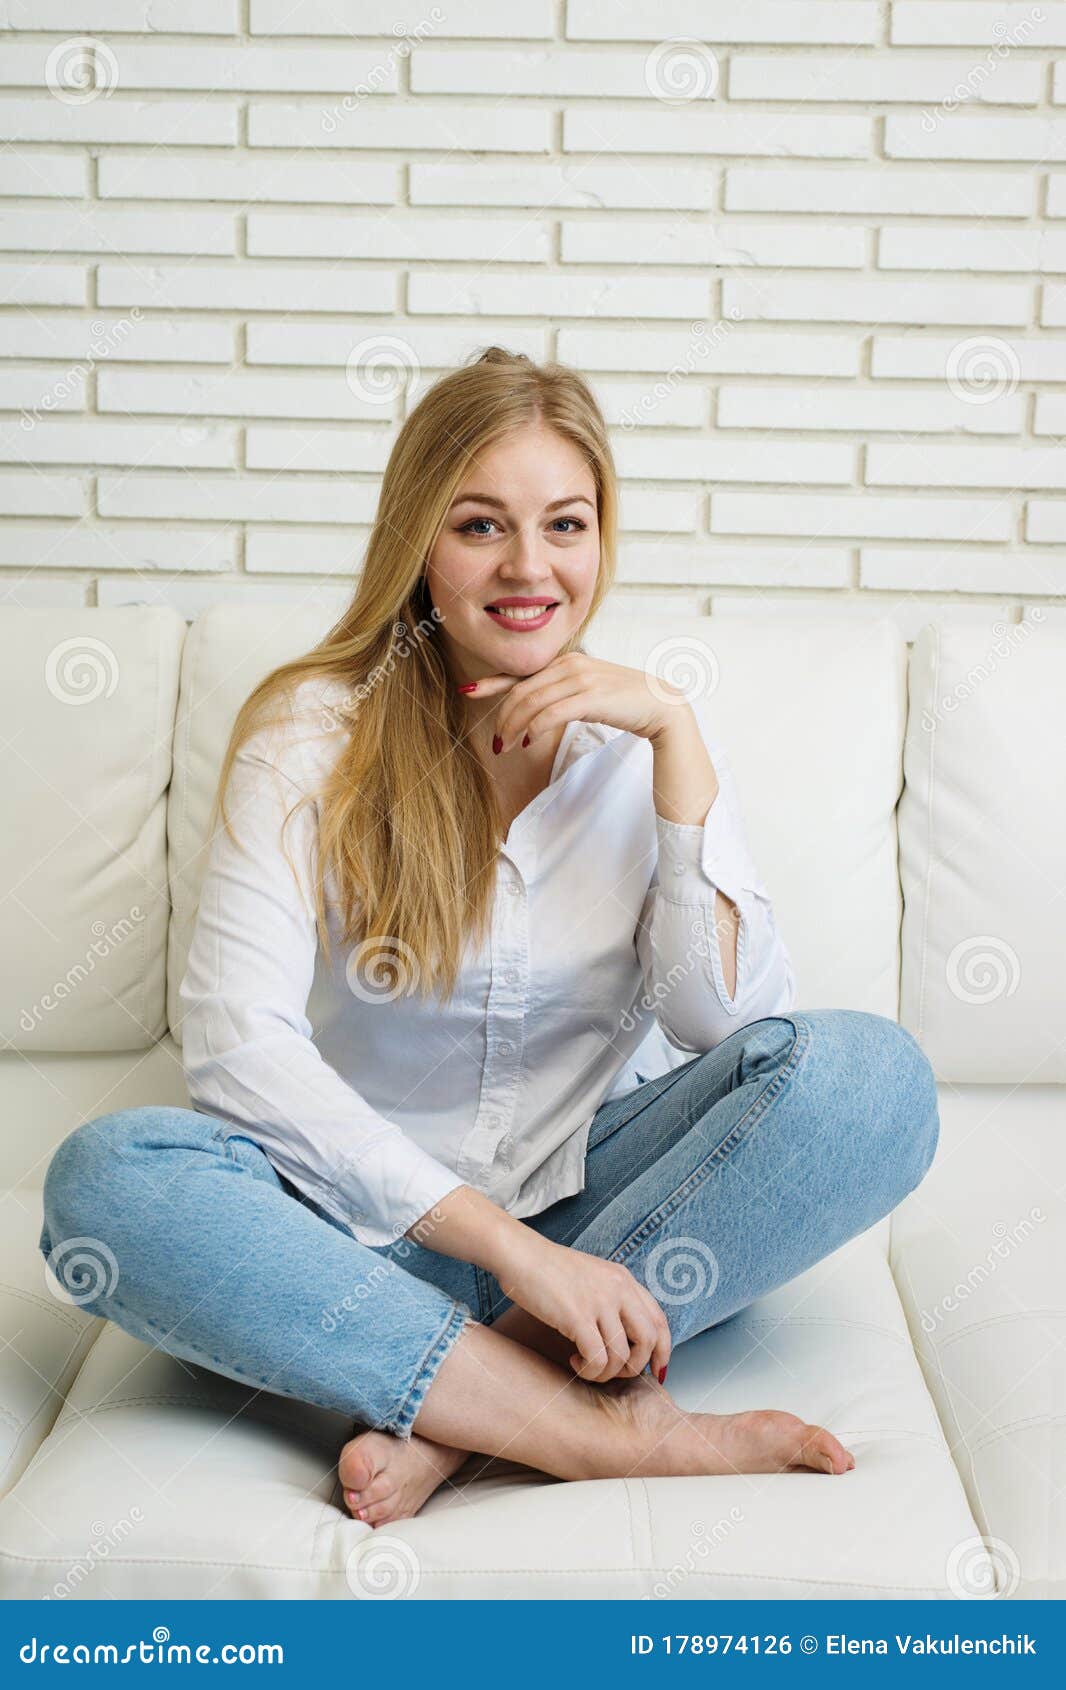 Pretty Young Girl in Light Home Interior Stock Photo - Image of people ...